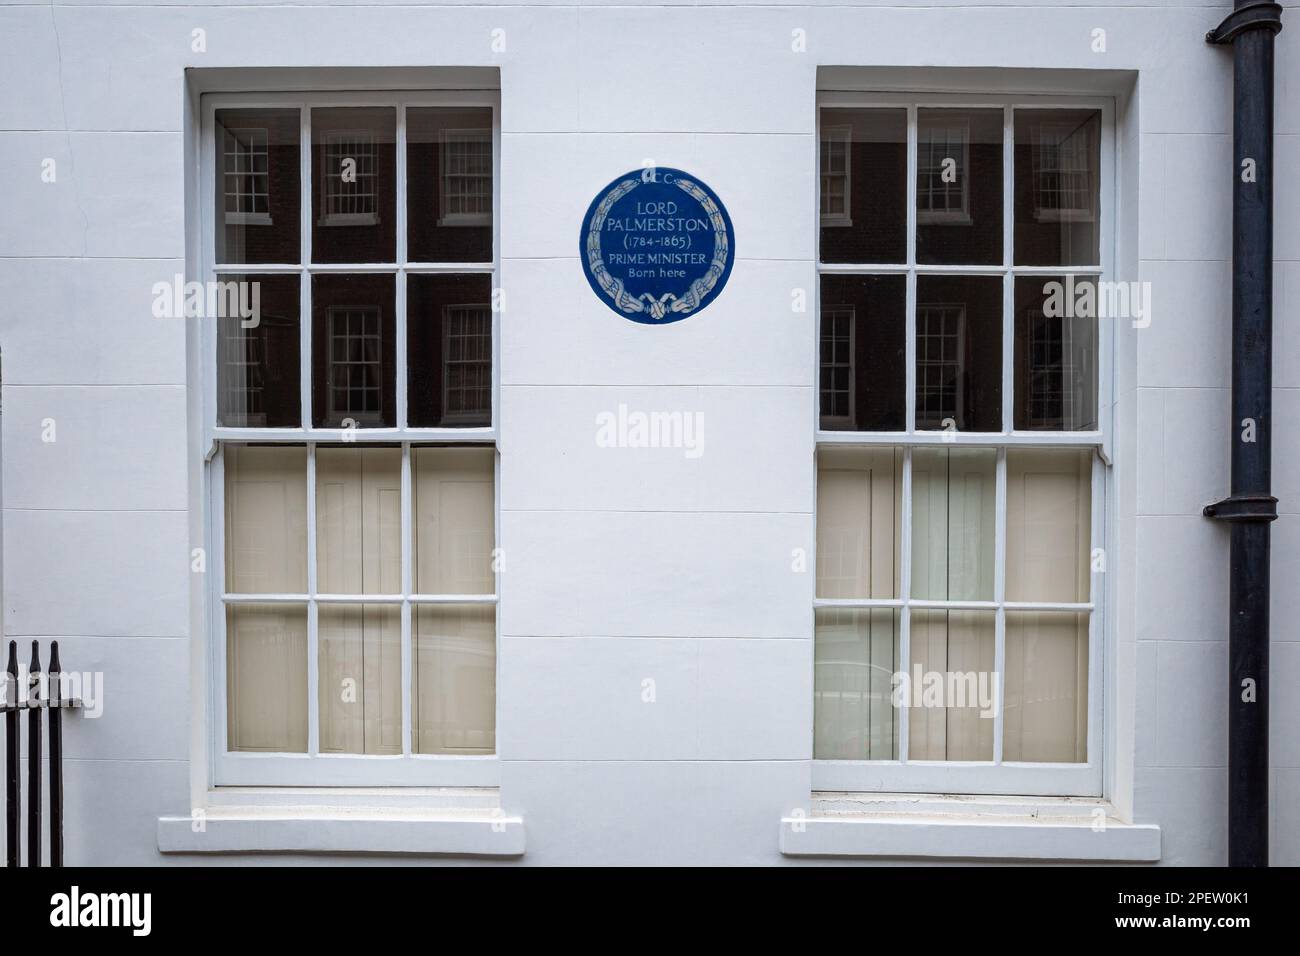 Lord Palmerston Blue Plaque at 20 Queen Anne's Gate, Westminster, London - LORD PALMERSTON (1784-1865) PRIME MINISTER Born here. Stock Photo